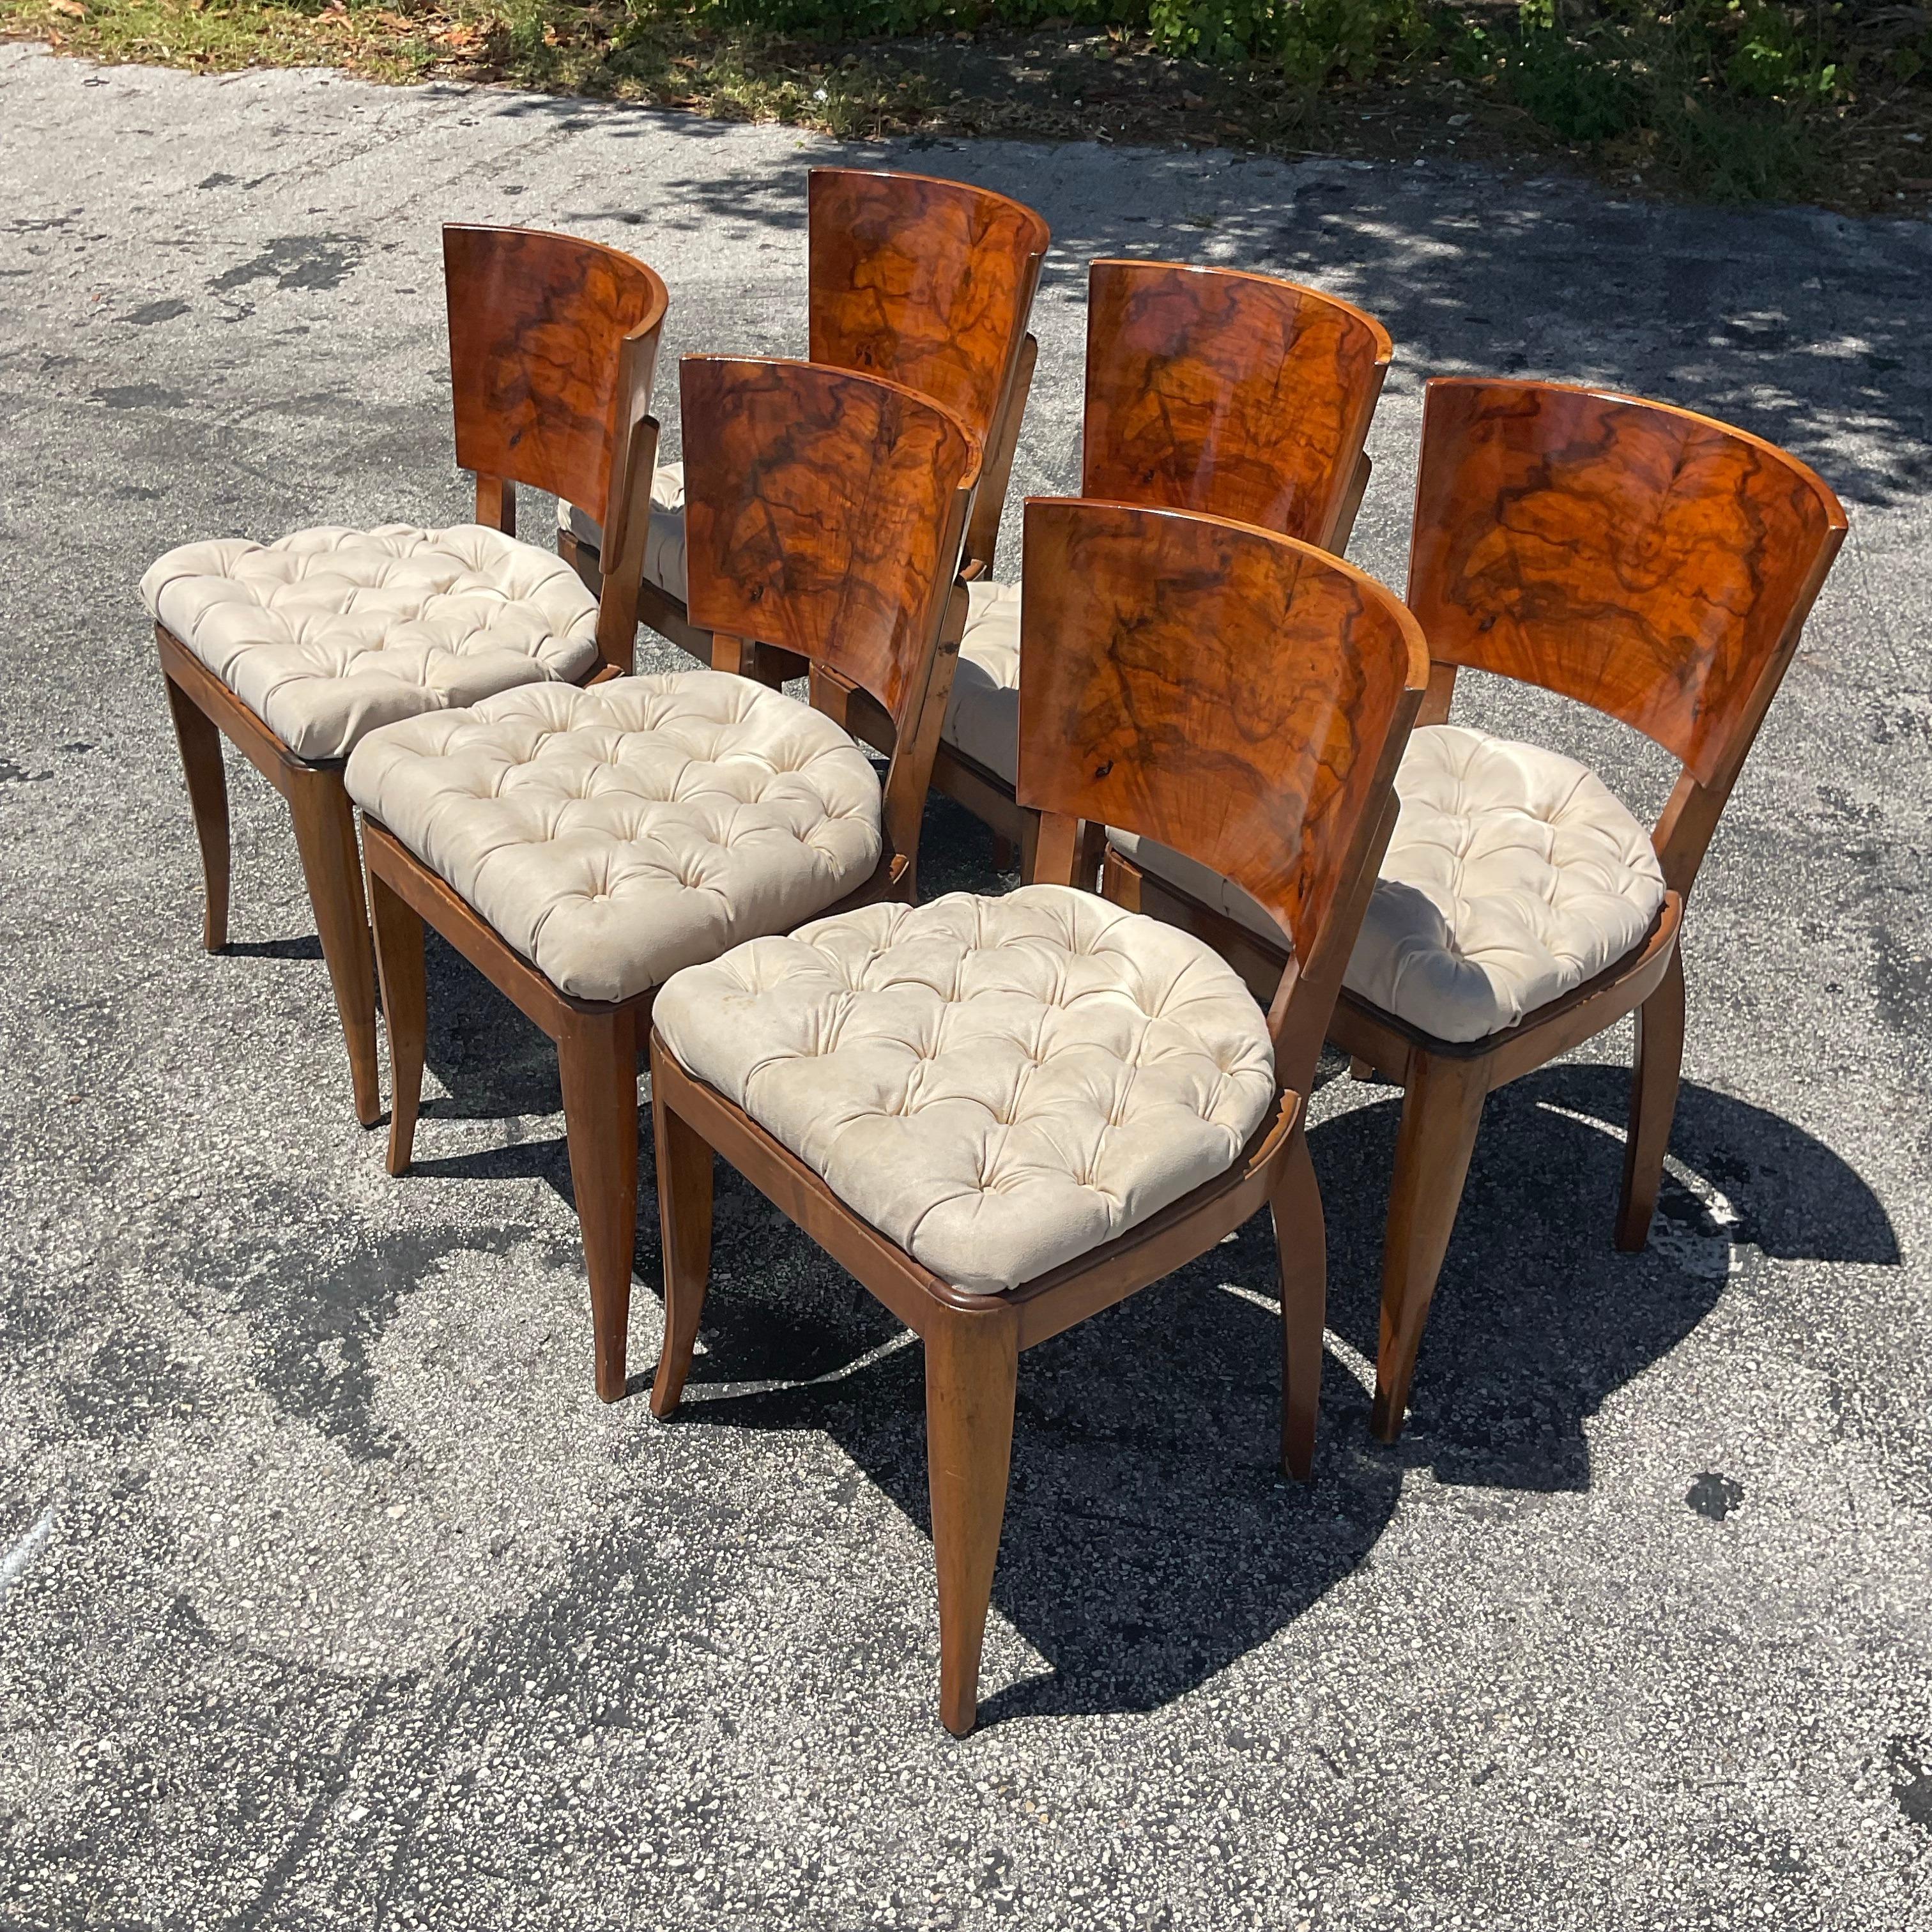 Vintage Deco Burl Wood Dining Chairs - Set of 6 For Sale 6